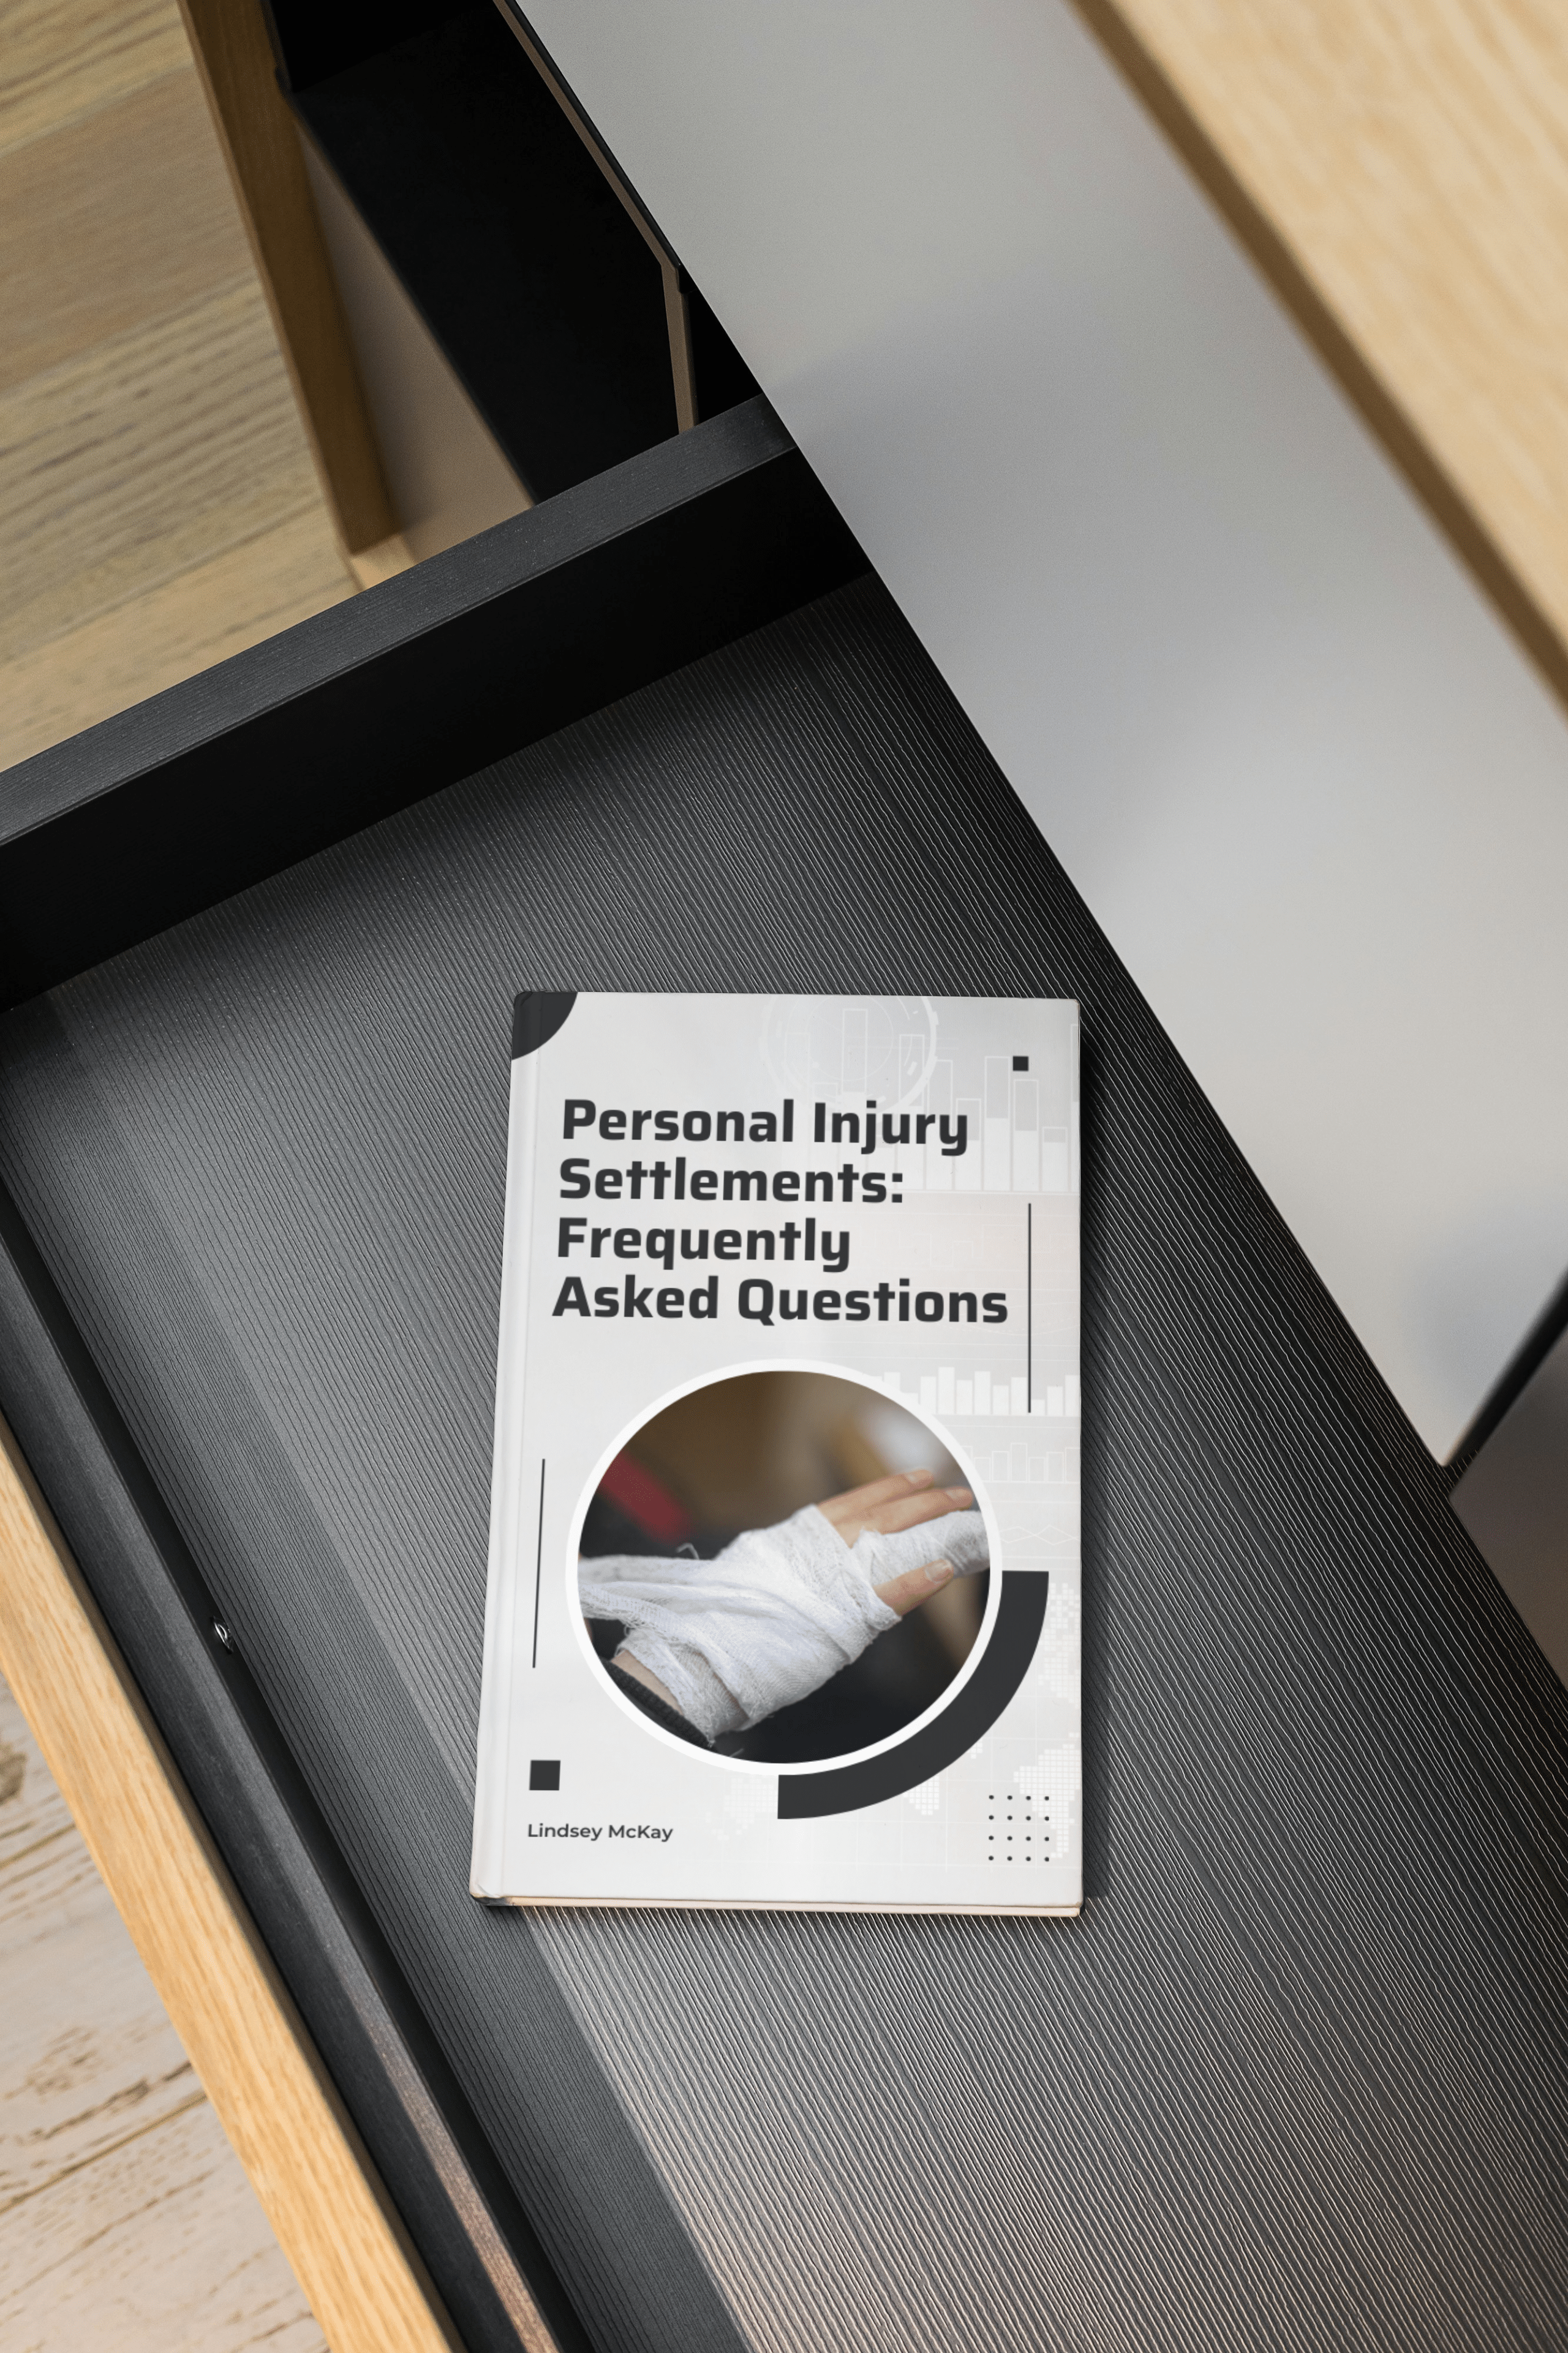 Personal Injury Settlements: Frequently Asked Questions​